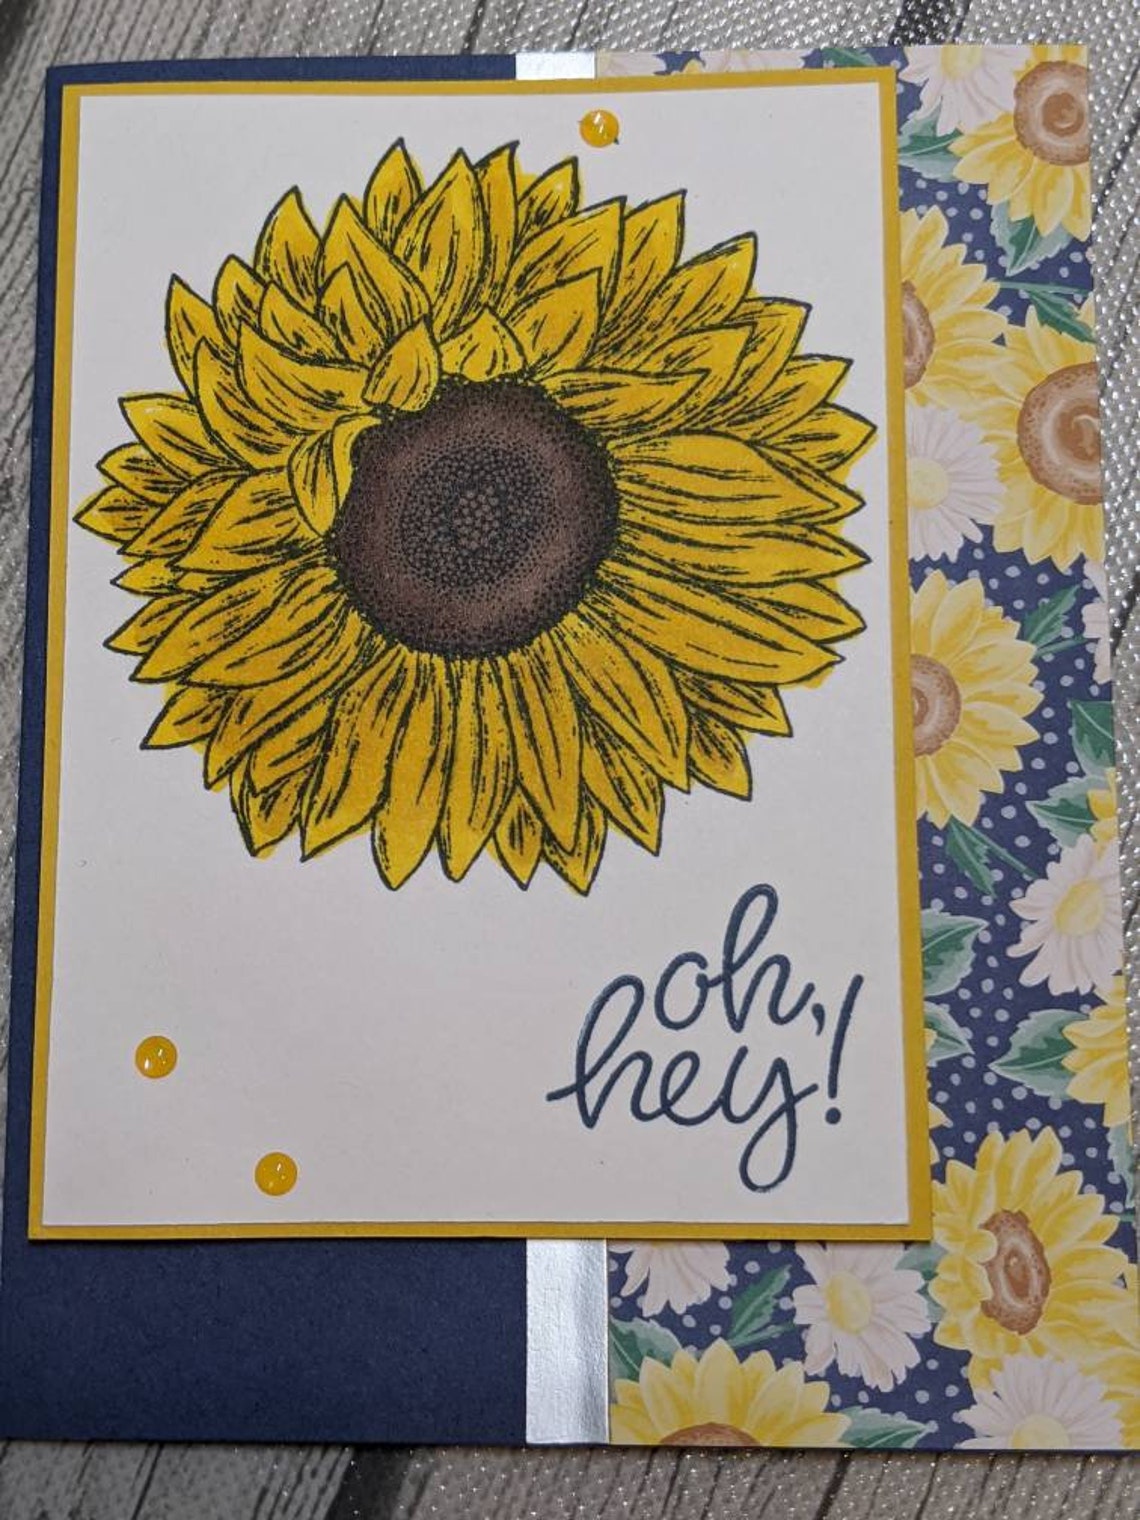 thinking-of-you-cards-stampin-up-celebrate-sunflower-cards-etsy